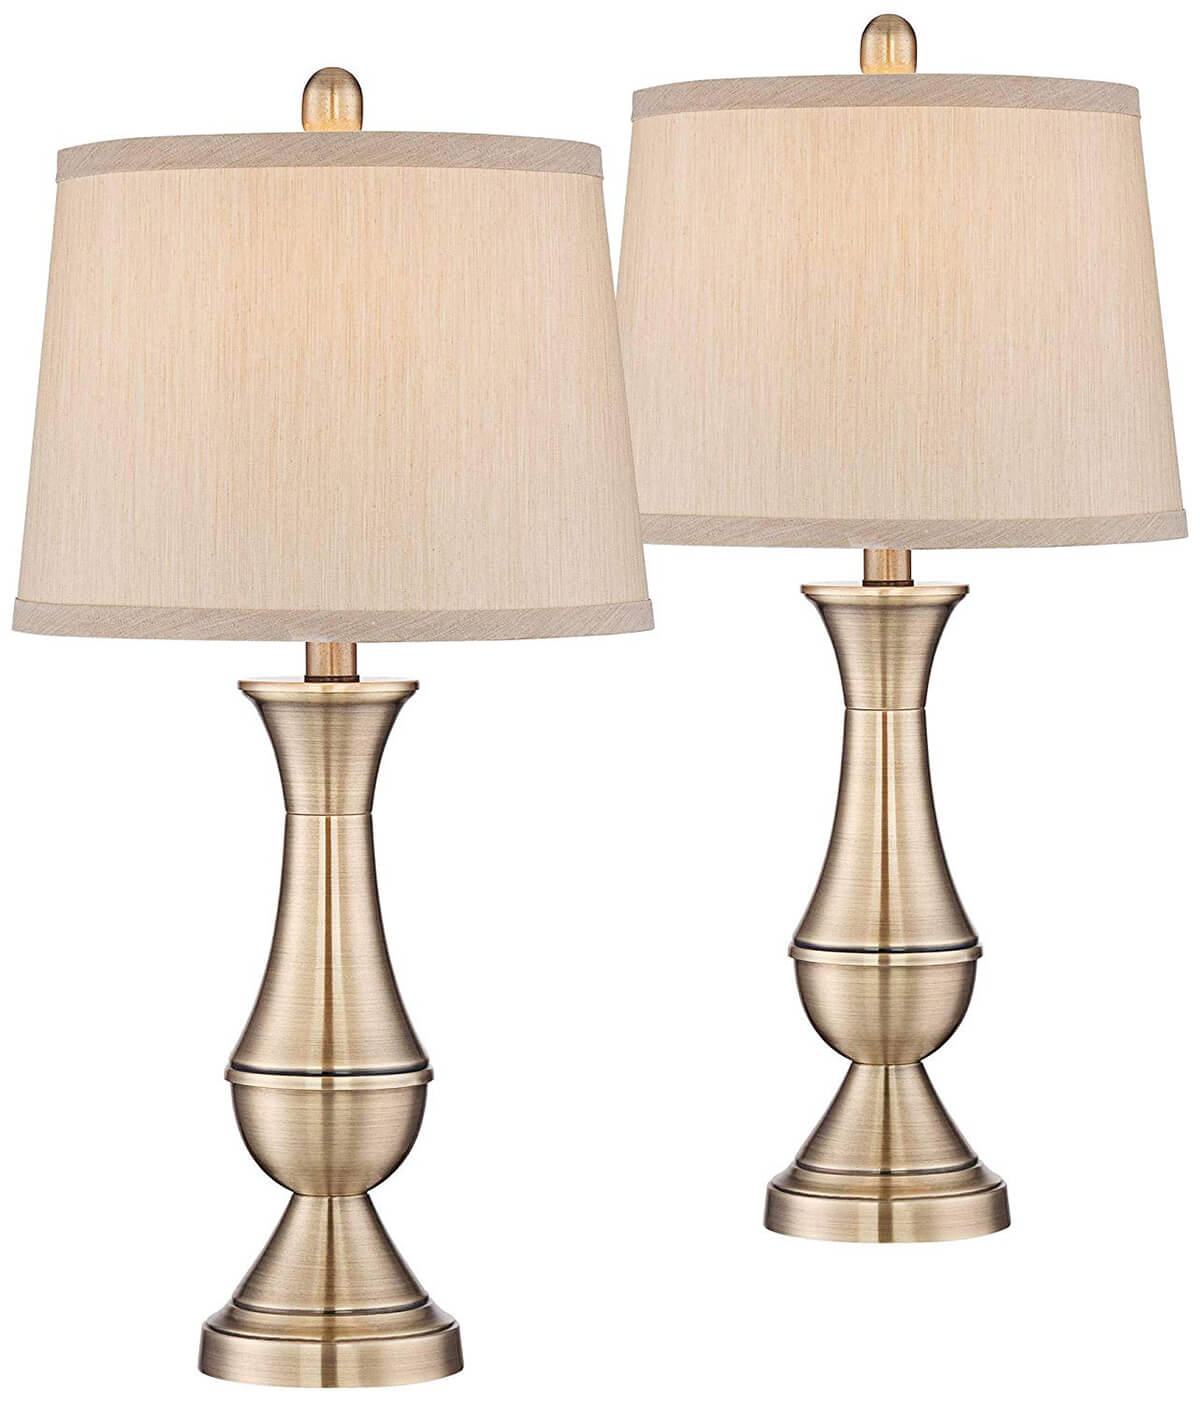 Set of Two Table Lamp Lights